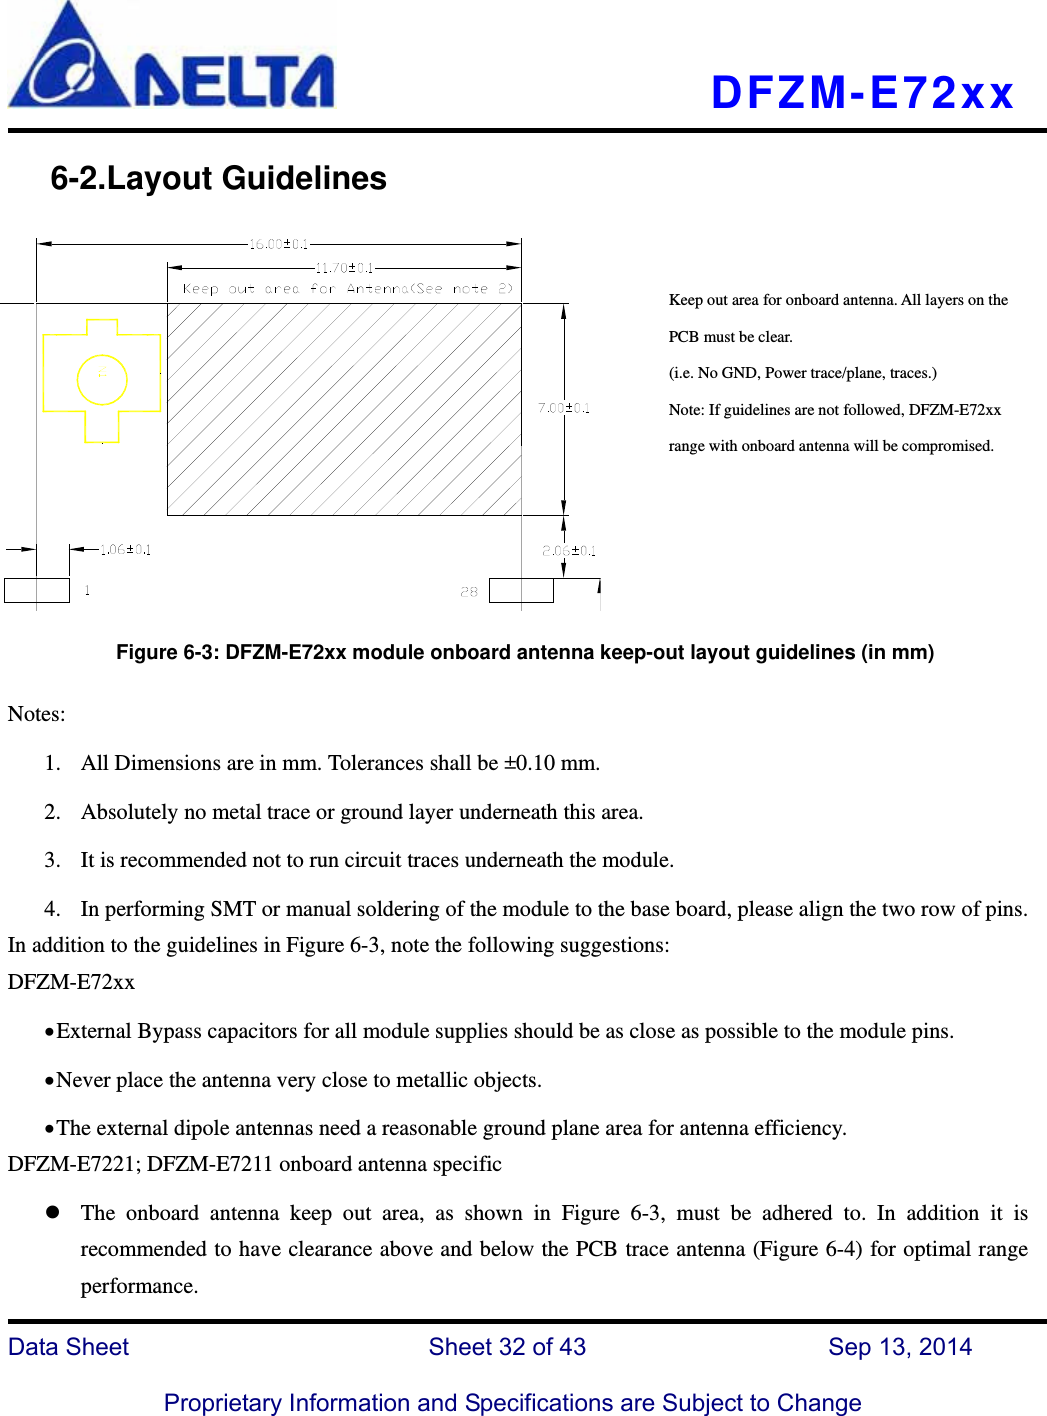   DFZM-E72xx   Data Sheet                 Sheet 32 of 43           Sep 13, 2014  Proprietary Information and Specifications are Subject to Change    6-2.Layout Guidelines          Figure 6-3: DFZM-E72xx module onboard antenna keep-out layout guidelines (in mm)  Notes: 1. All Dimensions are in mm. Tolerances shall be ±0.10 mm. 2. Absolutely no metal trace or ground layer underneath this area.   3. It is recommended not to run circuit traces underneath the module. 4. In performing SMT or manual soldering of the module to the base board, please align the two row of pins. In addition to the guidelines in Figure 6-3, note the following suggestions:   DFZM-E72xx   External Bypass capacitors for all module supplies should be as close as possible to the module pins.  Never place the antenna very close to metallic objects.  The external dipole antennas need a reasonable ground plane area for antenna efficiency. DFZM-E7221; DFZM-E7211 onboard antenna specific  The onboard antenna keep out area, as shown in Figure 6-3, must be adhered to. In addition it is recommended to have clearance above and below the PCB trace antenna (Figure 6-4) for optimal range performance. Keep out area for onboard antenna. All layers on the PCB must be clear. (i.e. No GND, Power trace/plane, traces.) Note: If guidelines are not followed, DFZM-E72xx range with onboard antenna will be compromised. 